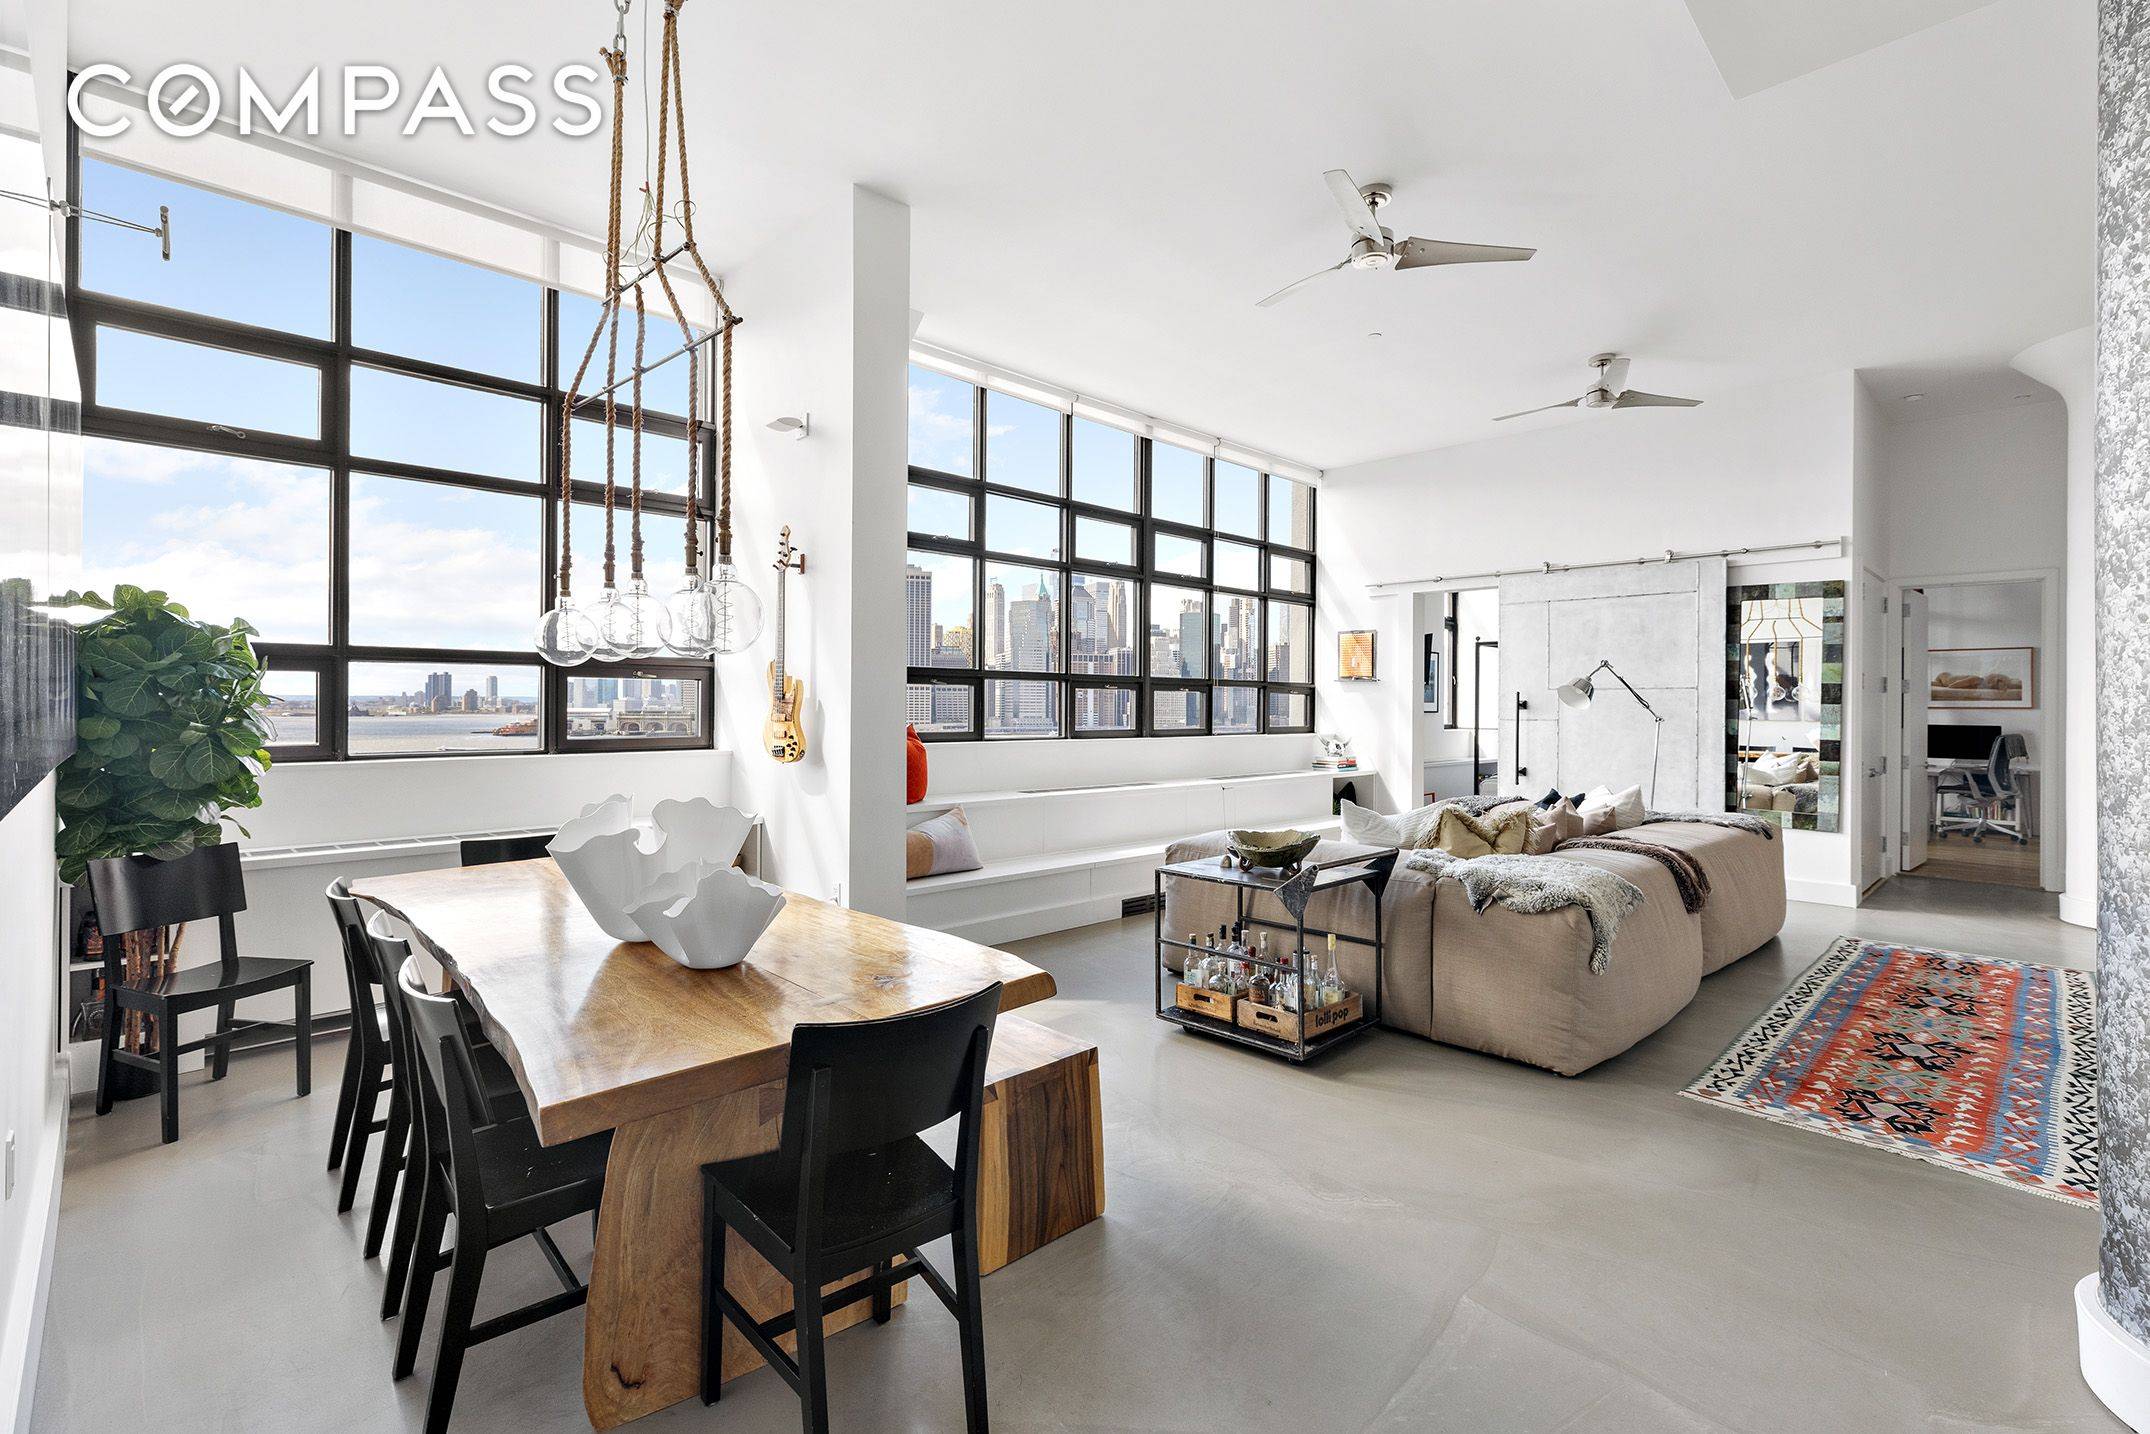 This incredible luxury loft at the unparalleled One Brooklyn Bridge Park offers generous interiors that will dazzle you, and the feel of a true home with an expansive, gracious layout.